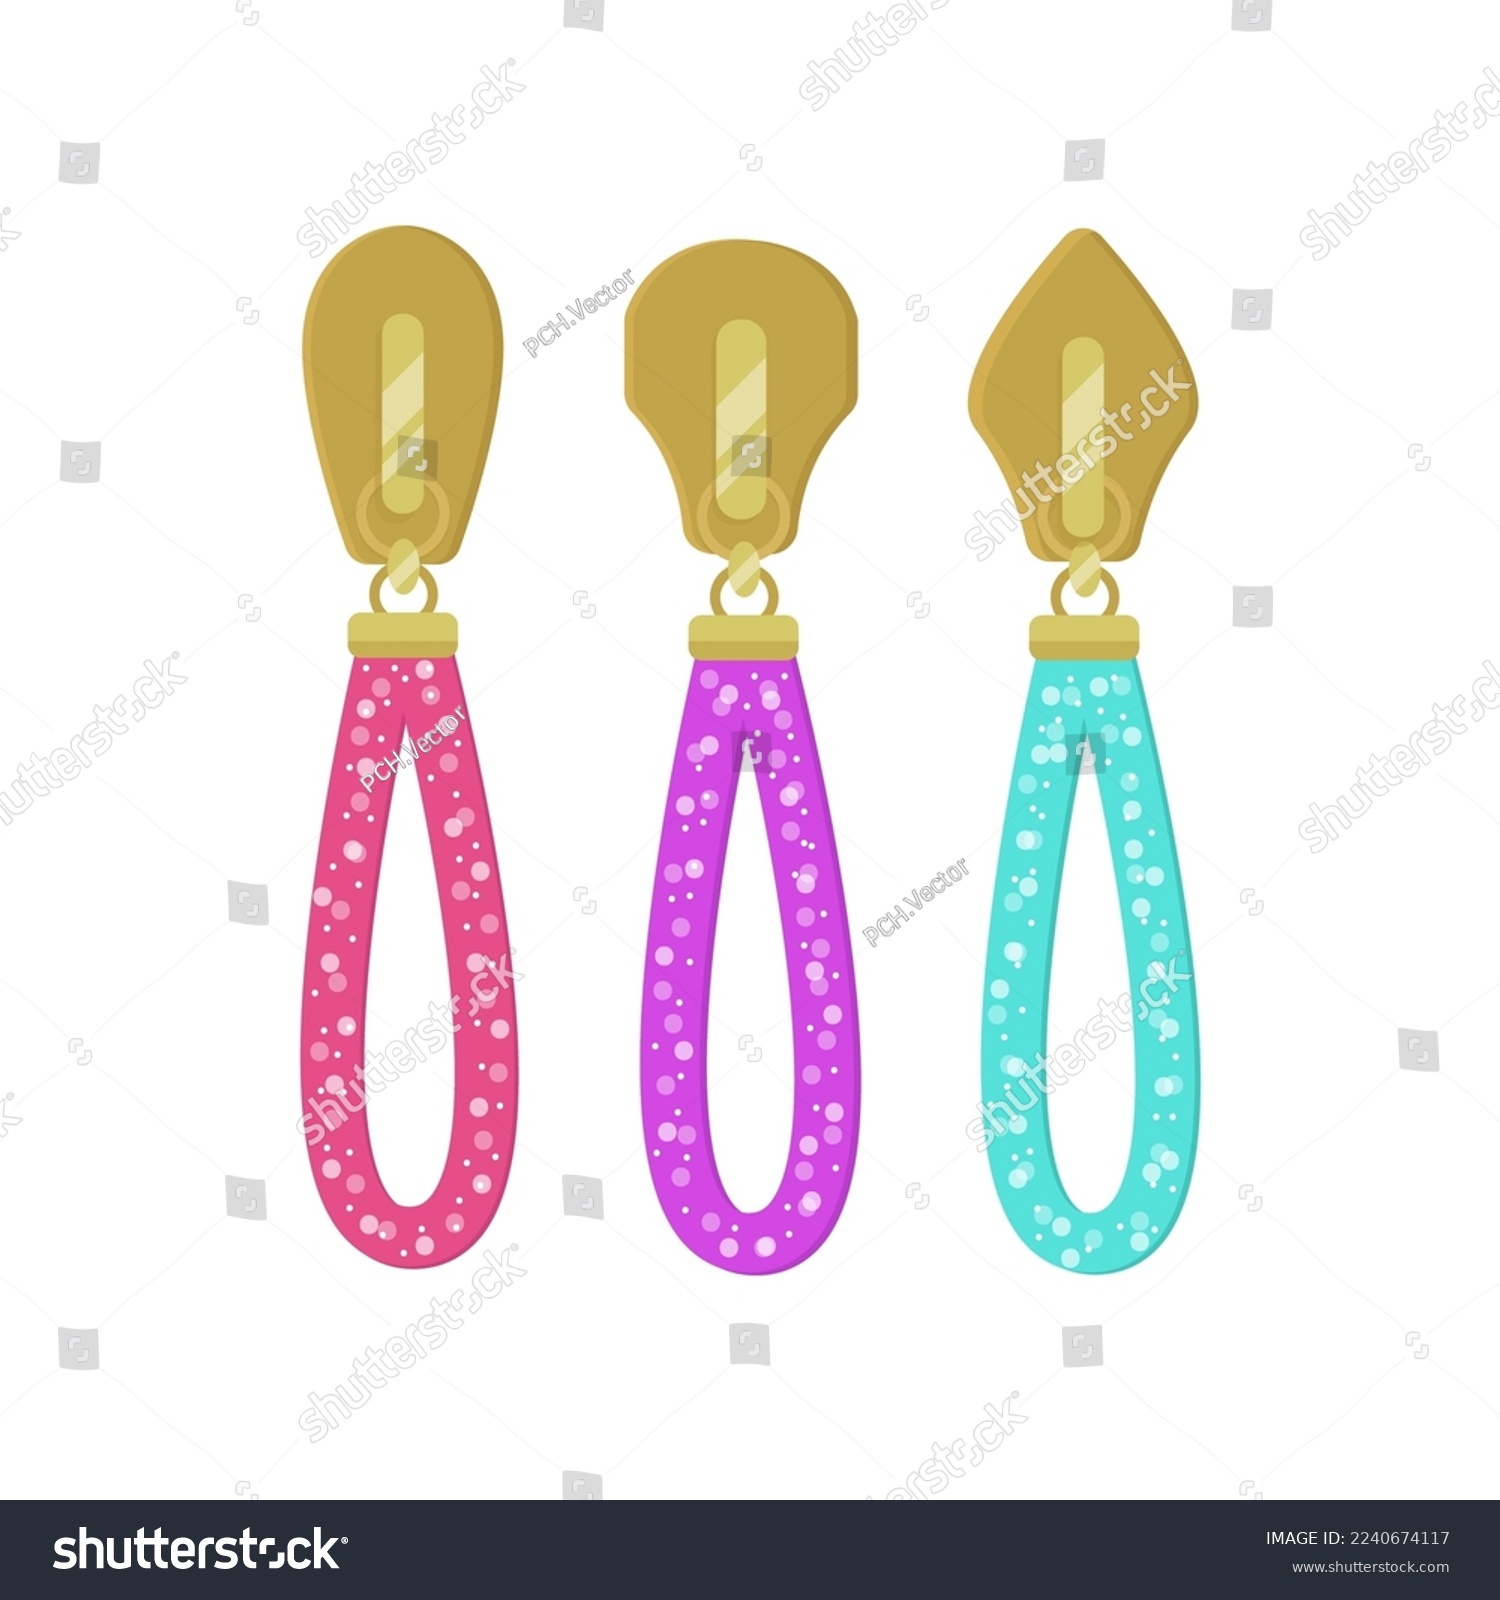 SVG of Modern golden and colorful zip sliders for clothes cartoon illustration. Golden zipper pullers with tassels for sportswear or leather backpacks. Fashion, metal accessories concept svg